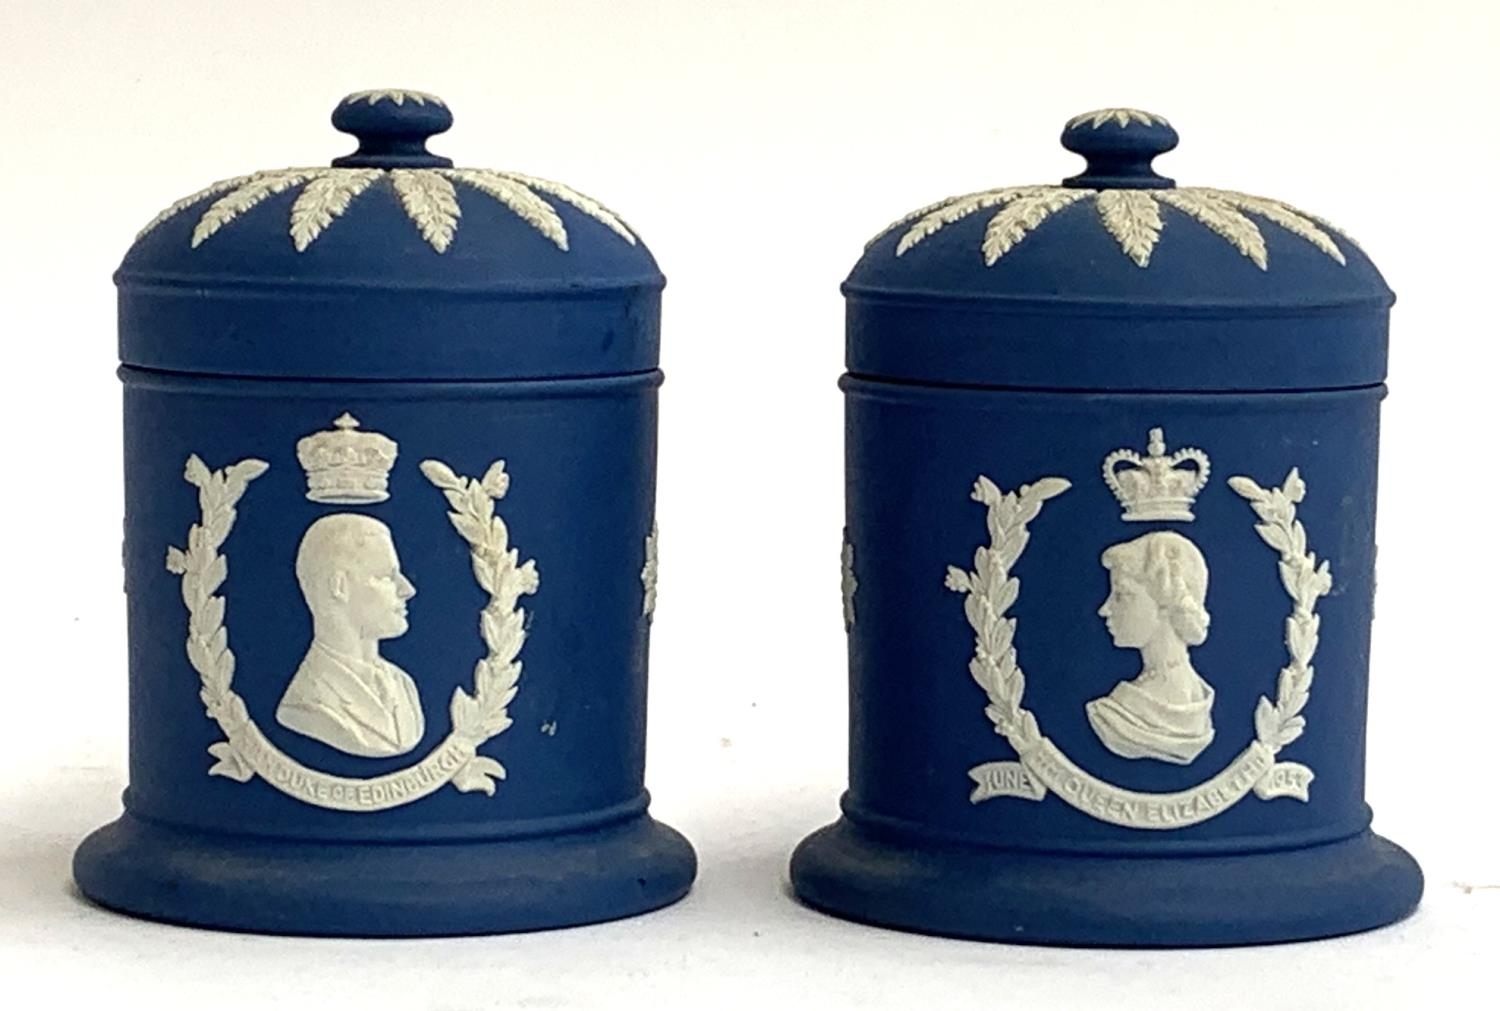 A pair of Wedgwood royal blue Jasperware lidded canisters, to commemorate the 1953 coronation, 11cmH